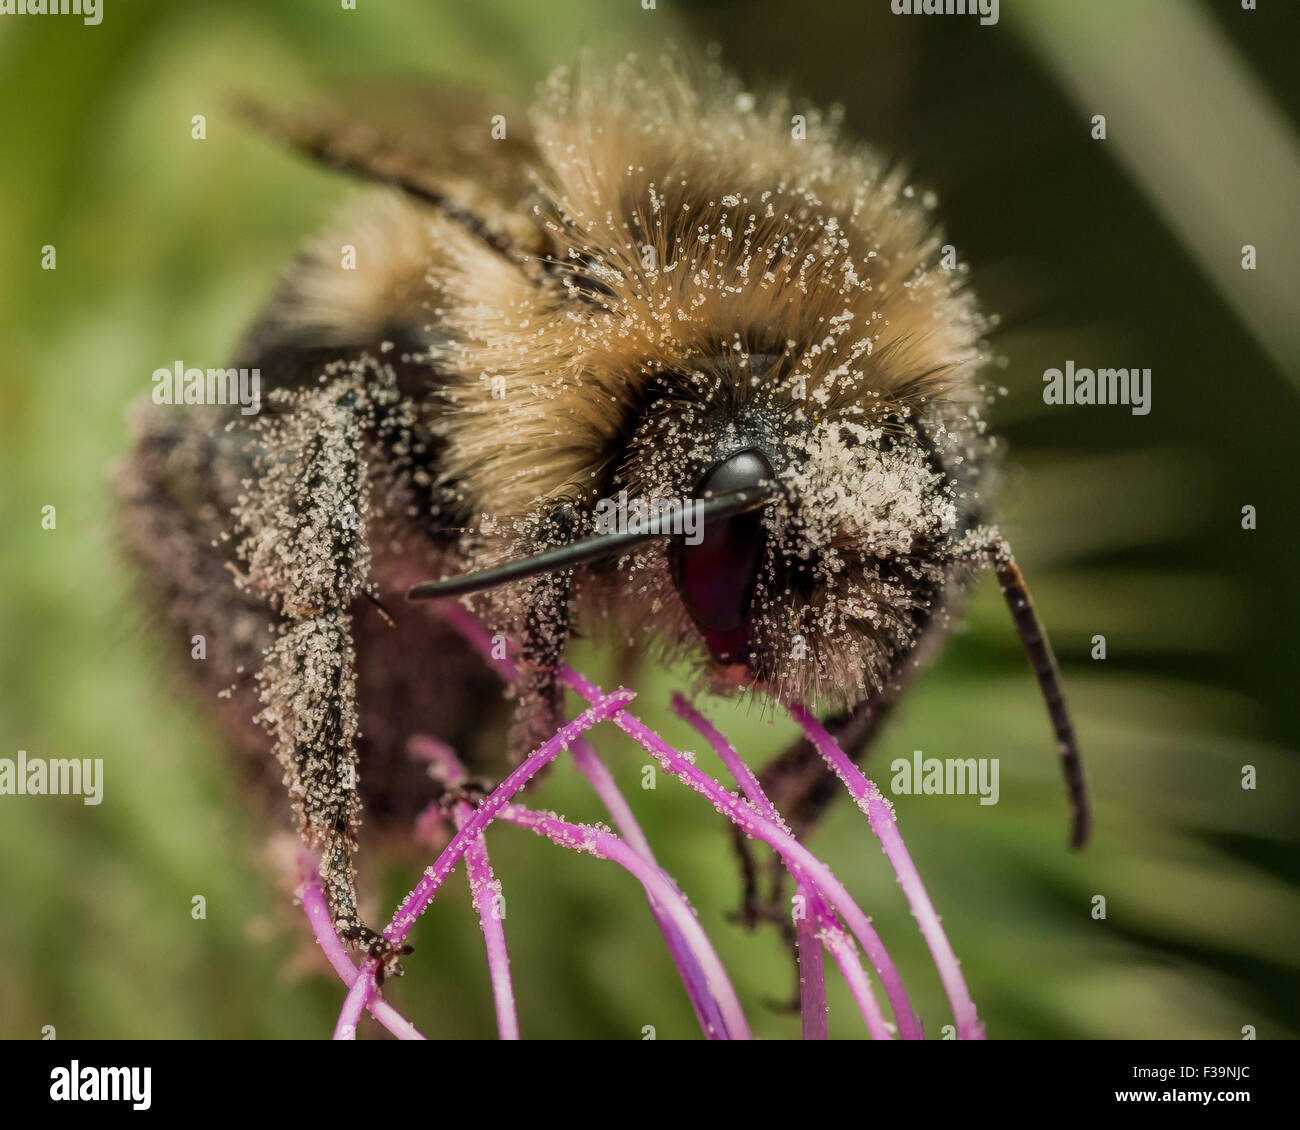 Bumble bee covered in pollen on purple thistle Stock Photo